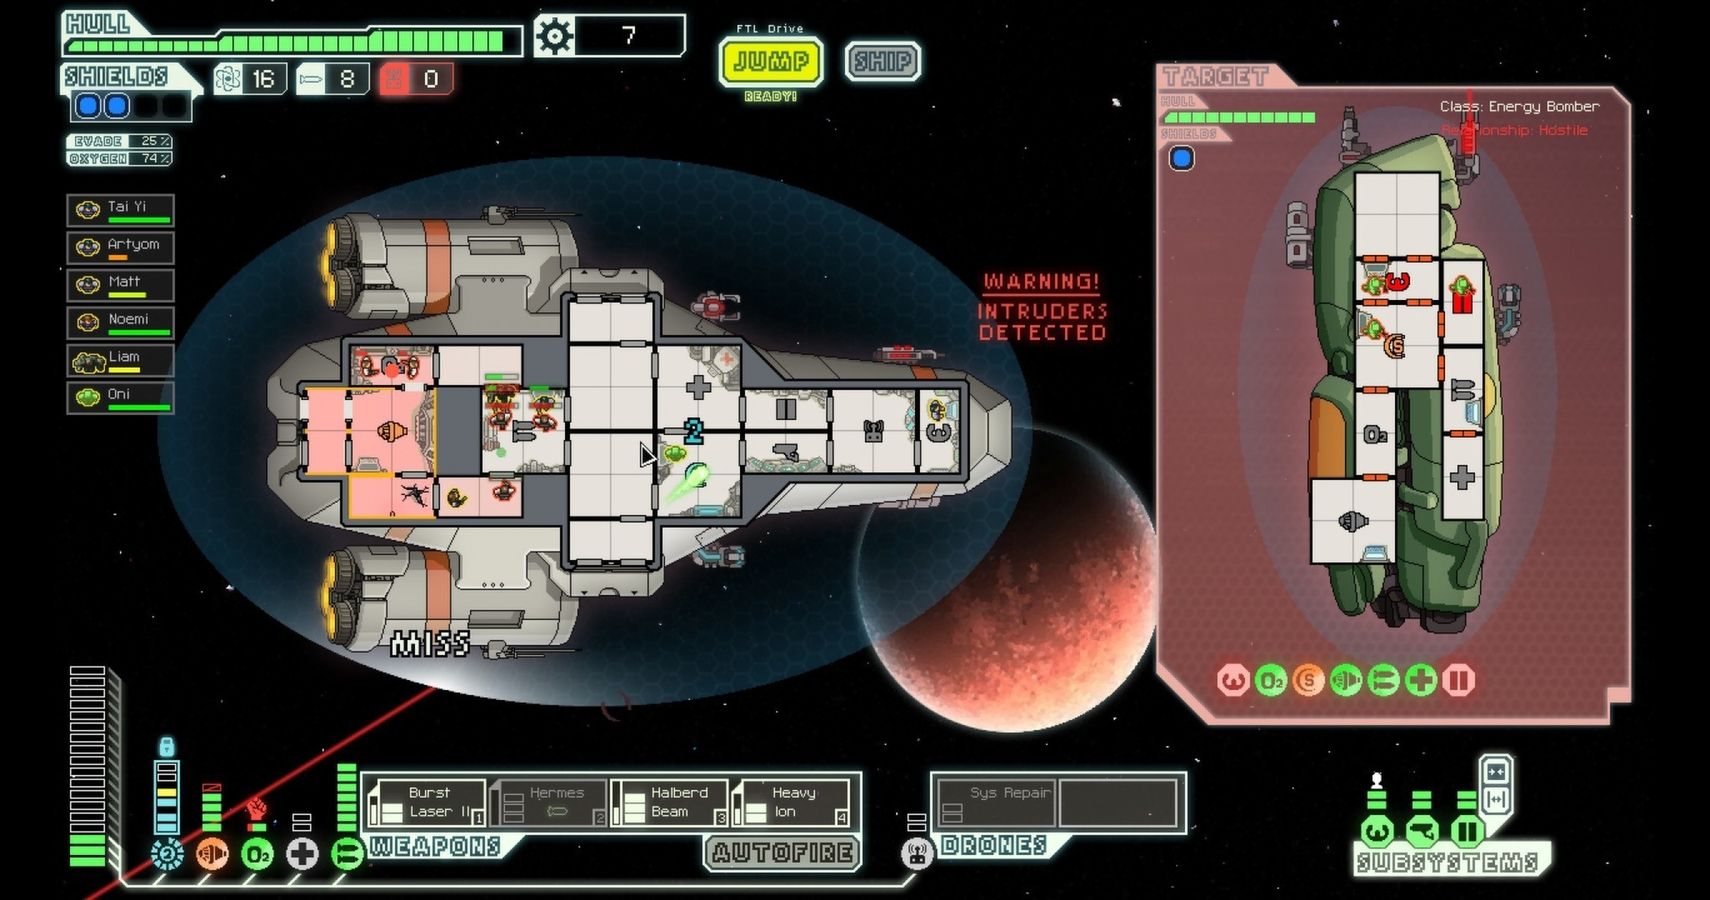 the kestrel in a dogfight with a zoltan ship